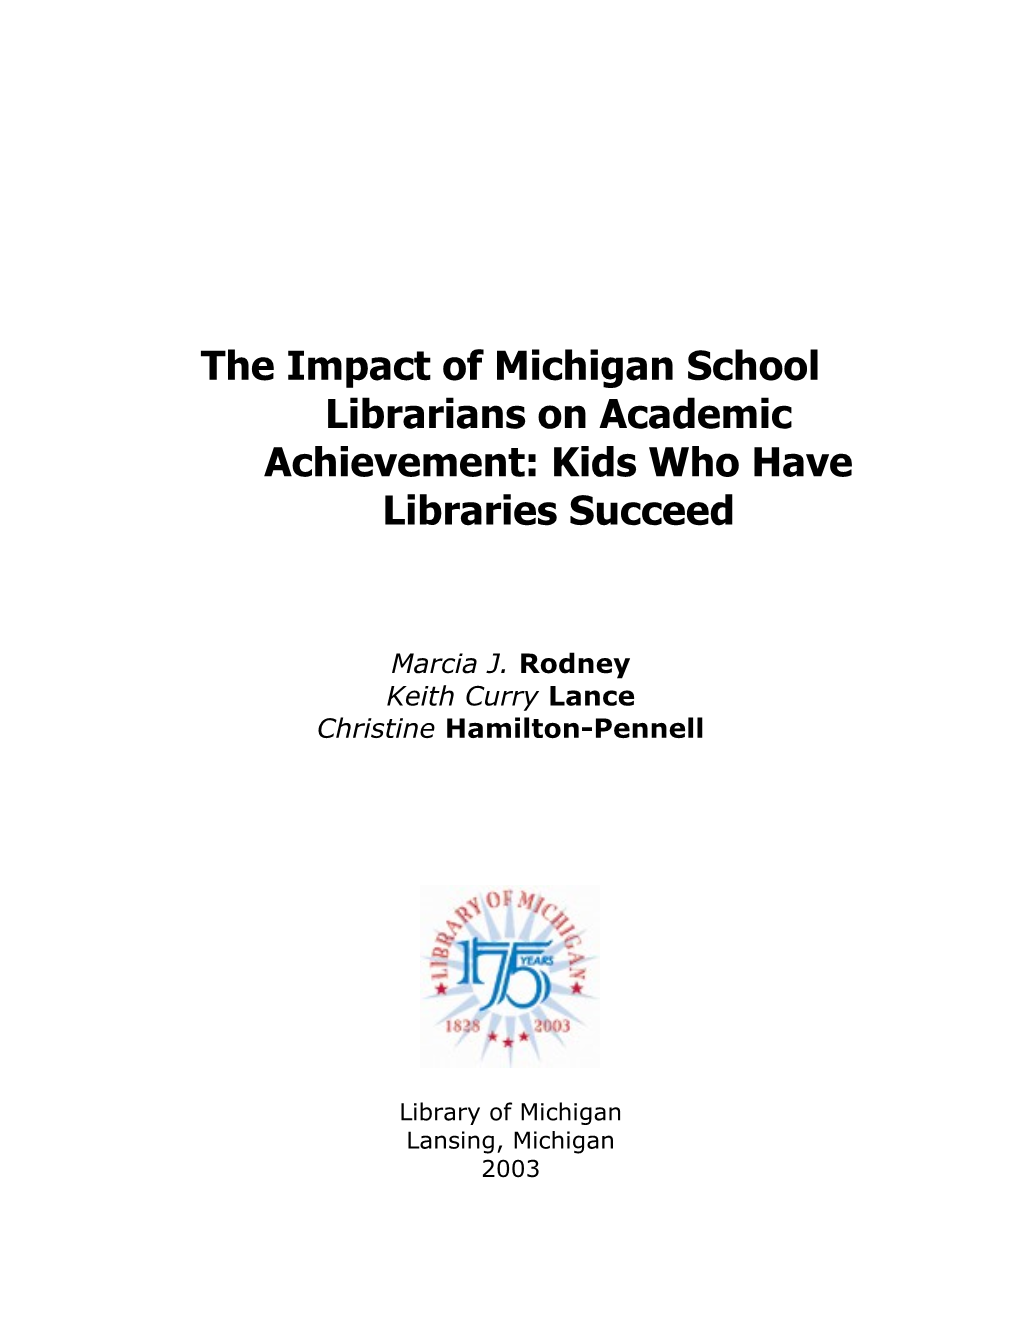 The Impact of Michigan School Librarians on Academic Achievement: Kids Who Have Libraries